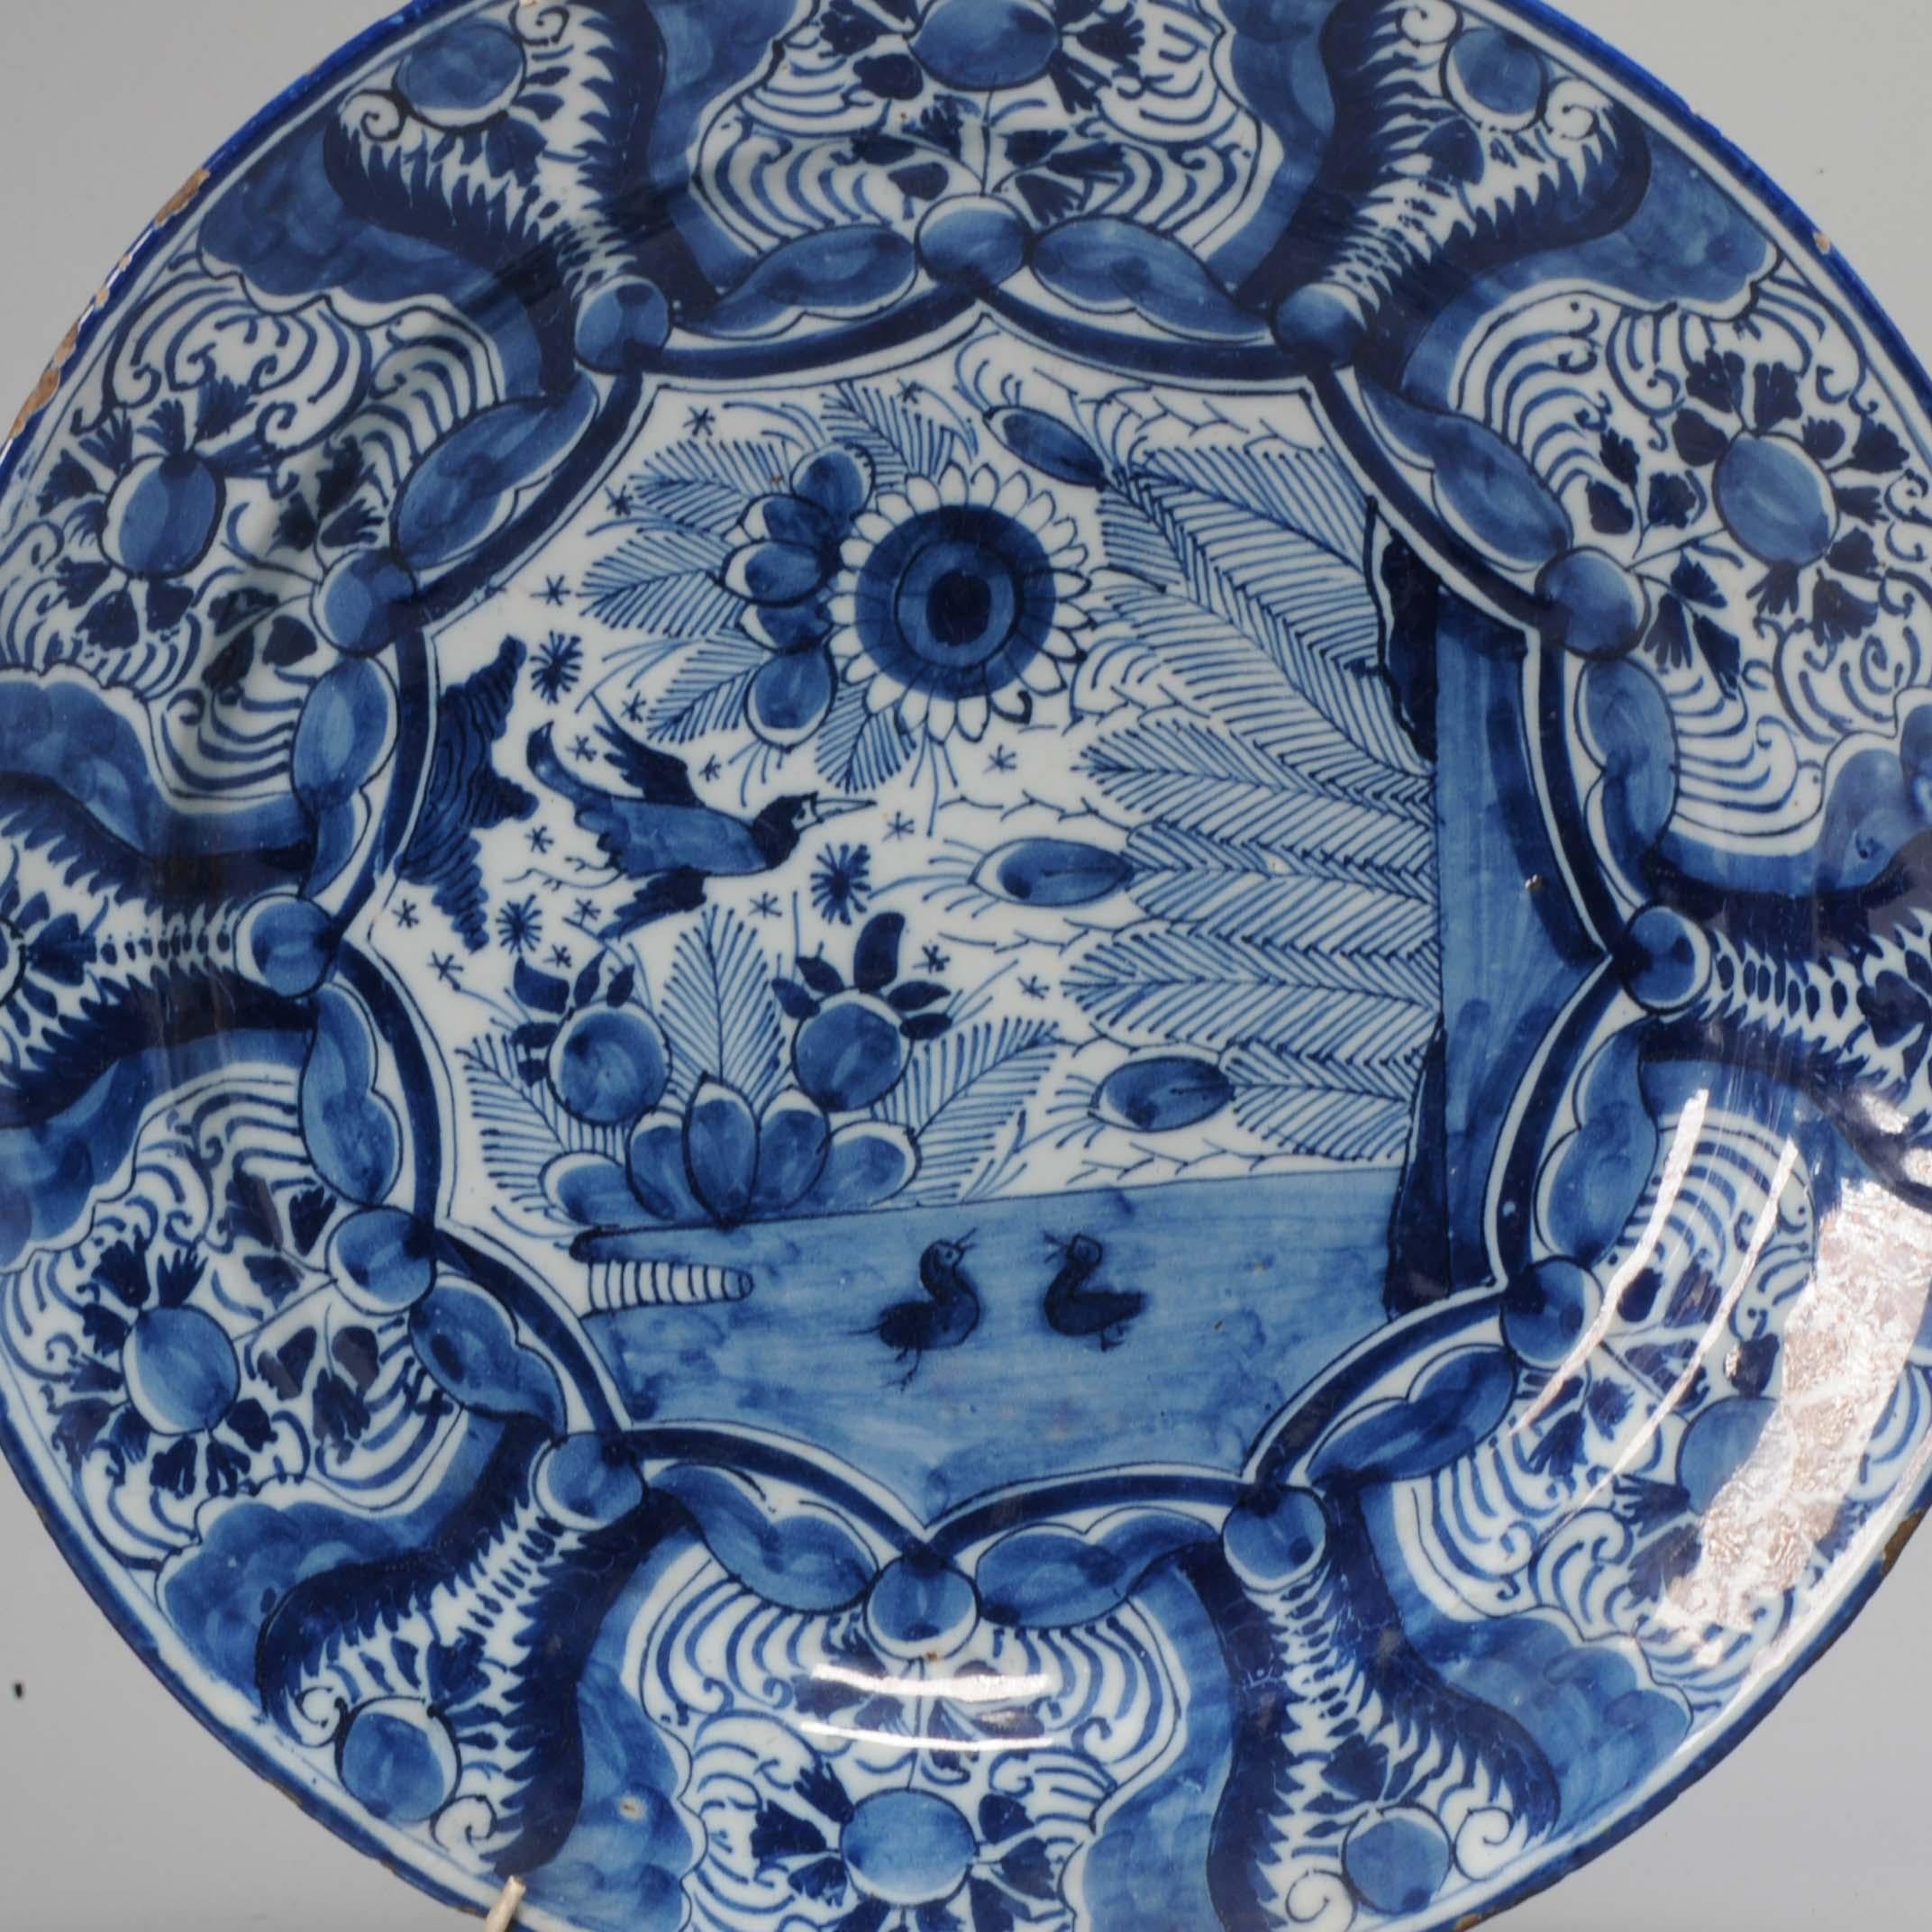 Earthenware dish with a flat rim. Decorated in different shades of blue on a white tin glaze

Condition
typical rimfritting/small chips only. Size 313x55mmm DiameterxHeight
Period
18th century.